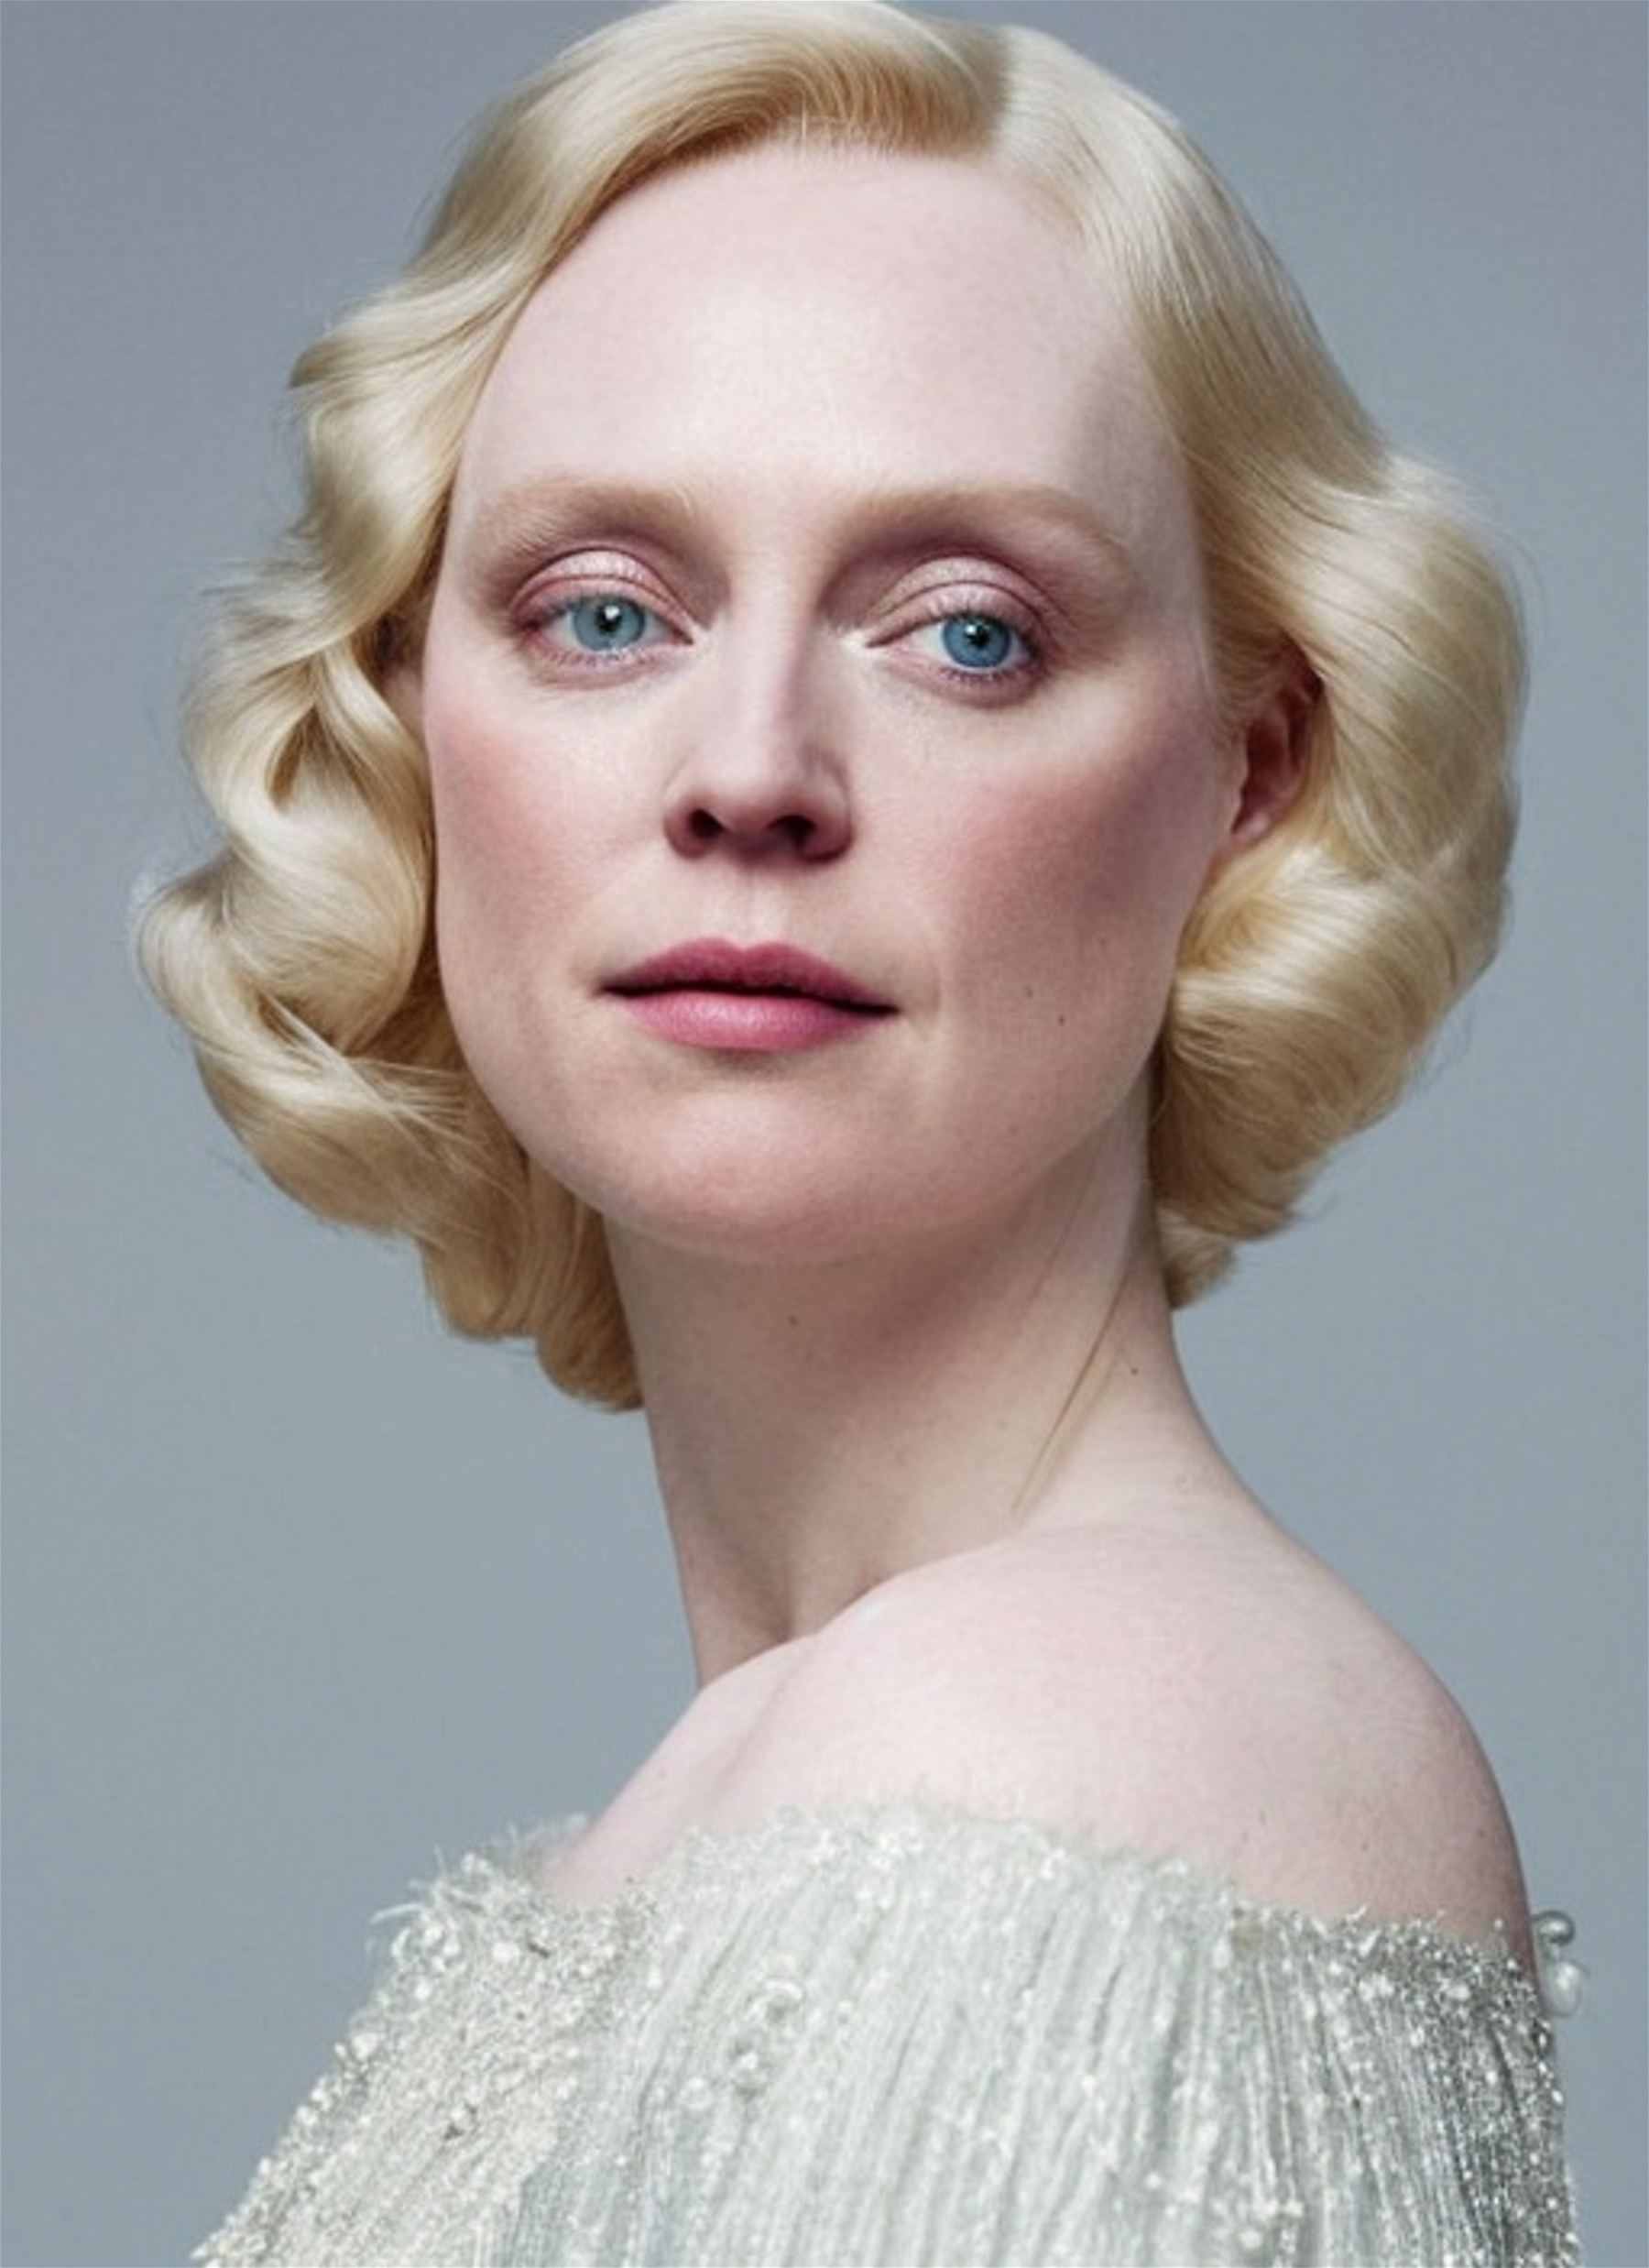 A dreamy and ethereal portrait of Gwendoline Christie, with a soft and angelic appearance, inspired by the works of Dave Rapoza and J.A.W. Cooper, featuring a pastel color palette and delicate details